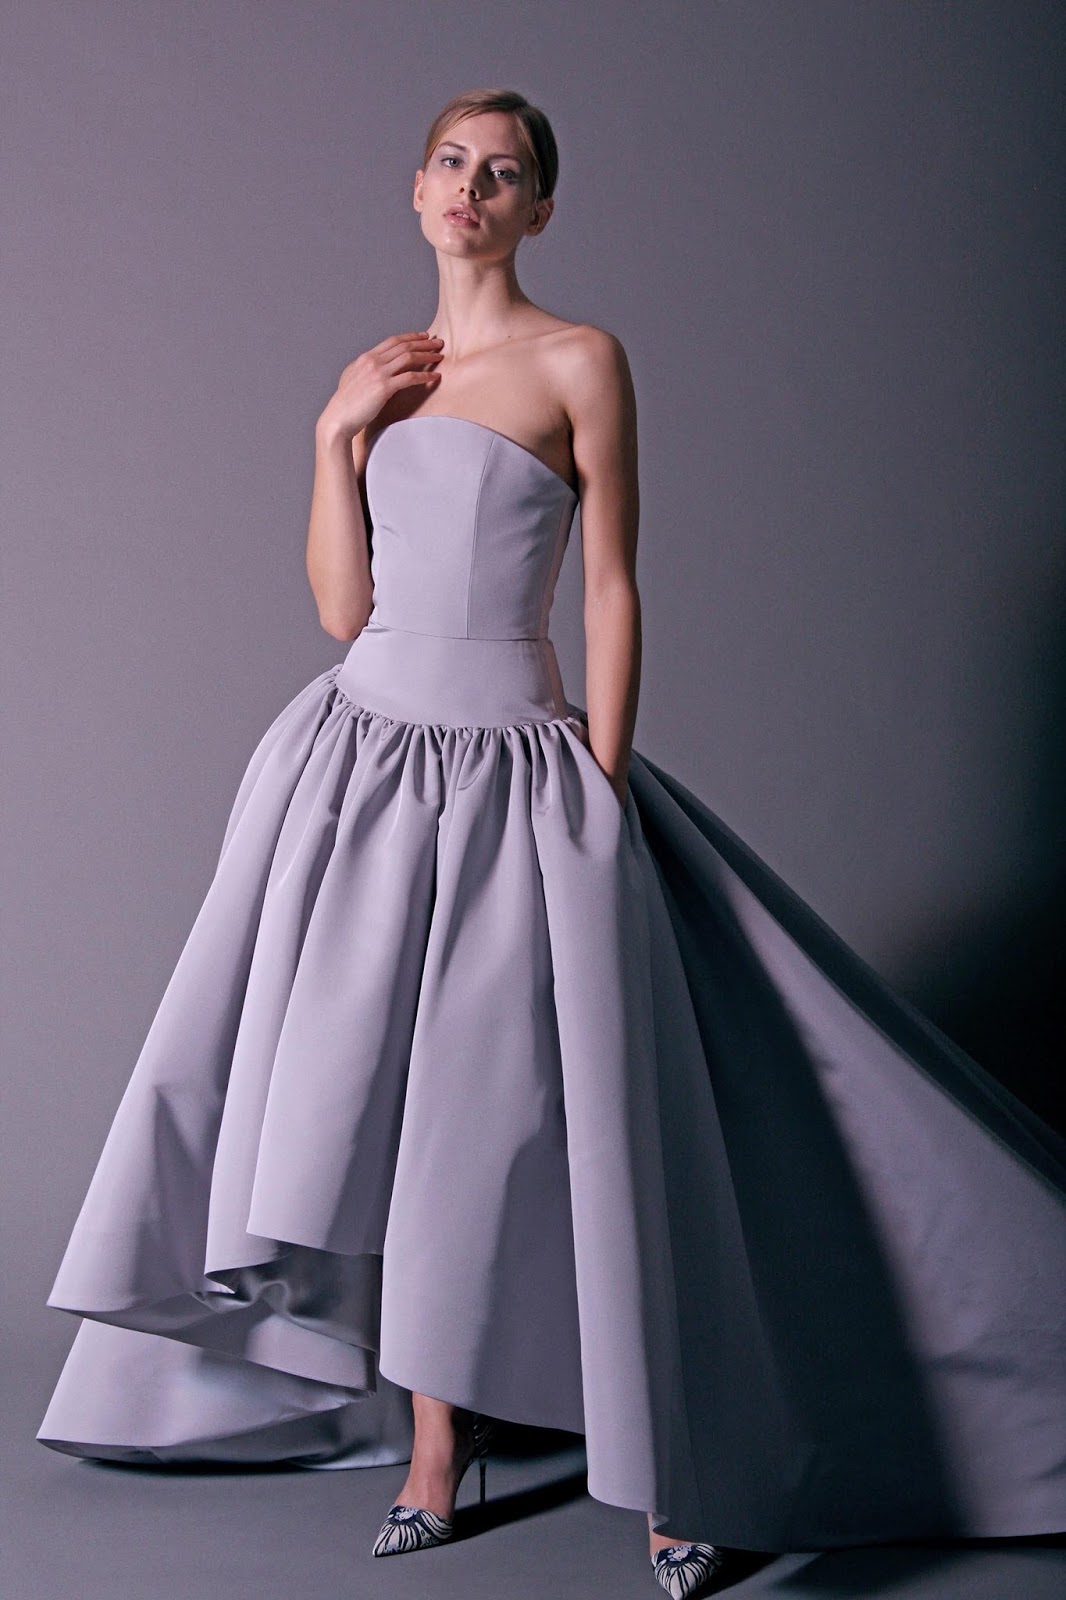 GOWN GLAMOUR: CHRISTIAN SIRIANO